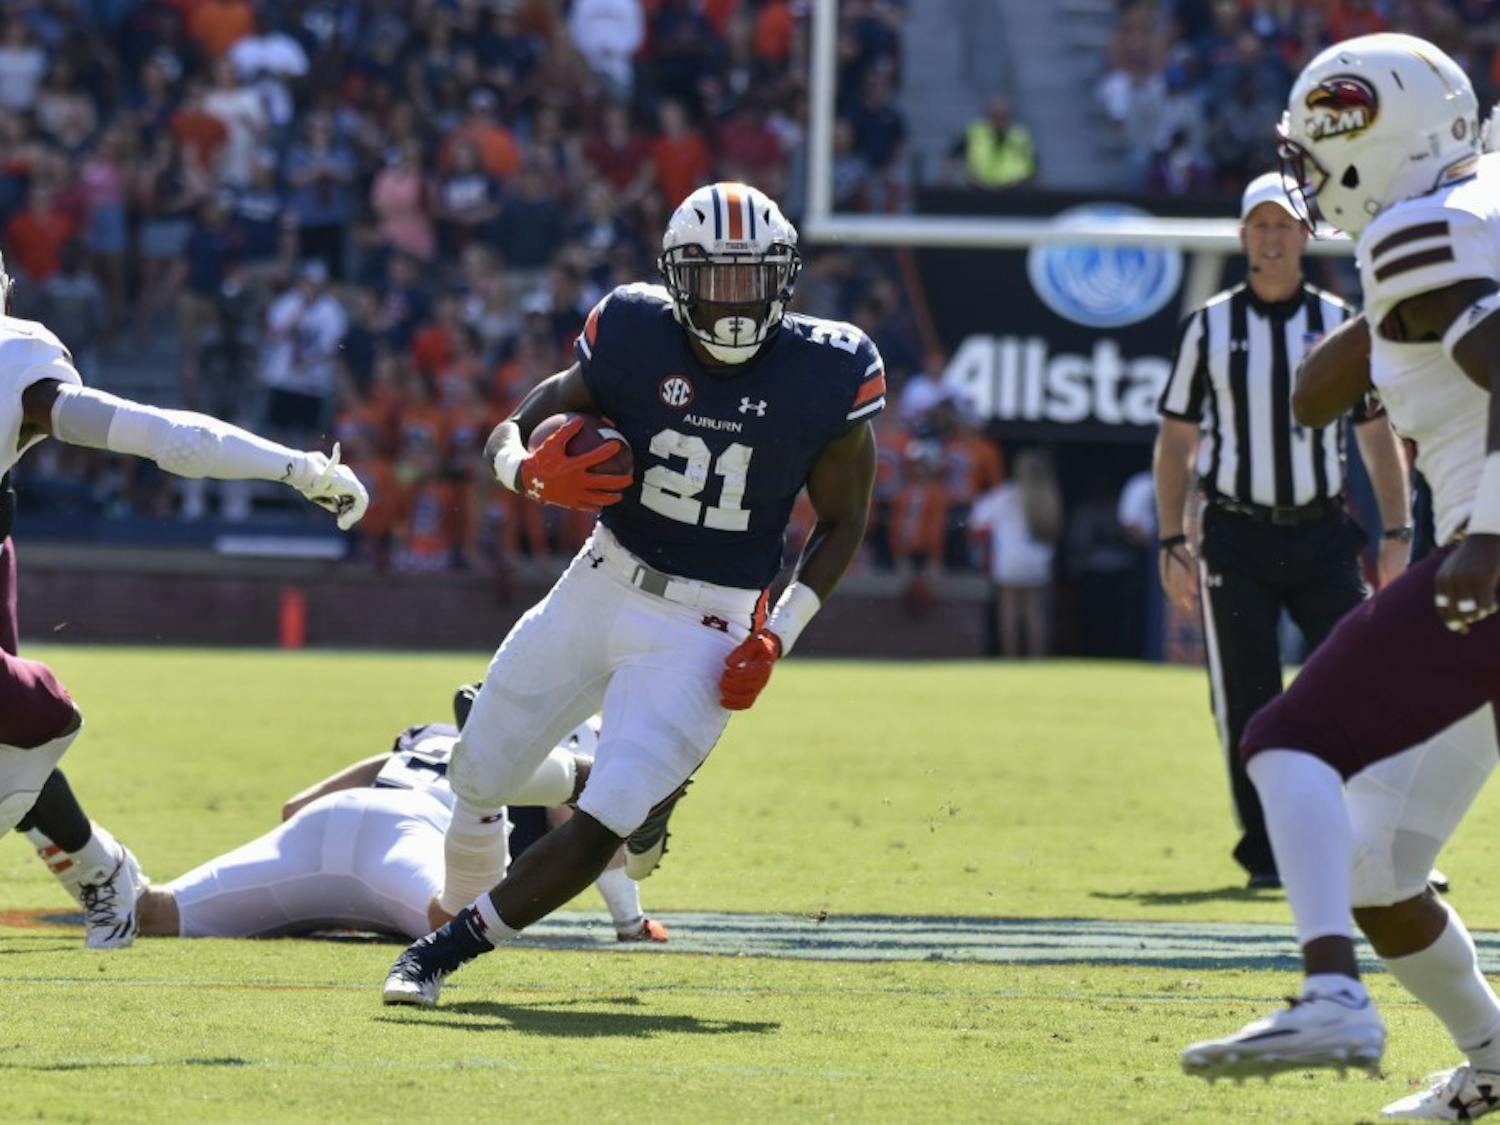 Kerryon Johnson (21) runs the ball during the first half of a NCAA college football game, Saturday, Oct. 1, 2016, in Auburn, Ala.